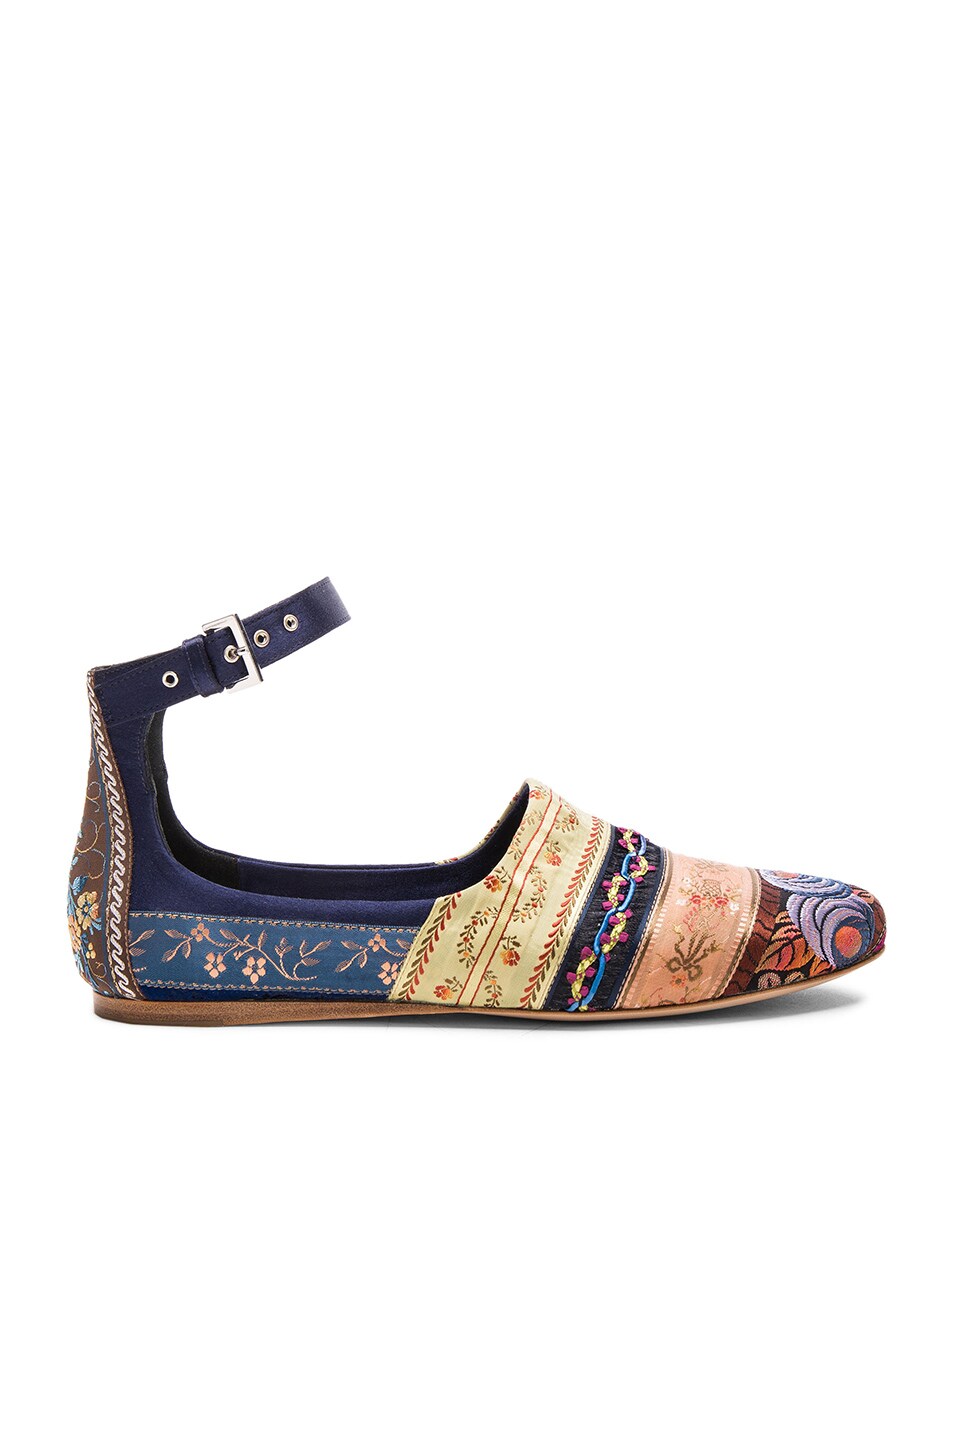 Image 1 of Etro Striped Flats in Navy Multi